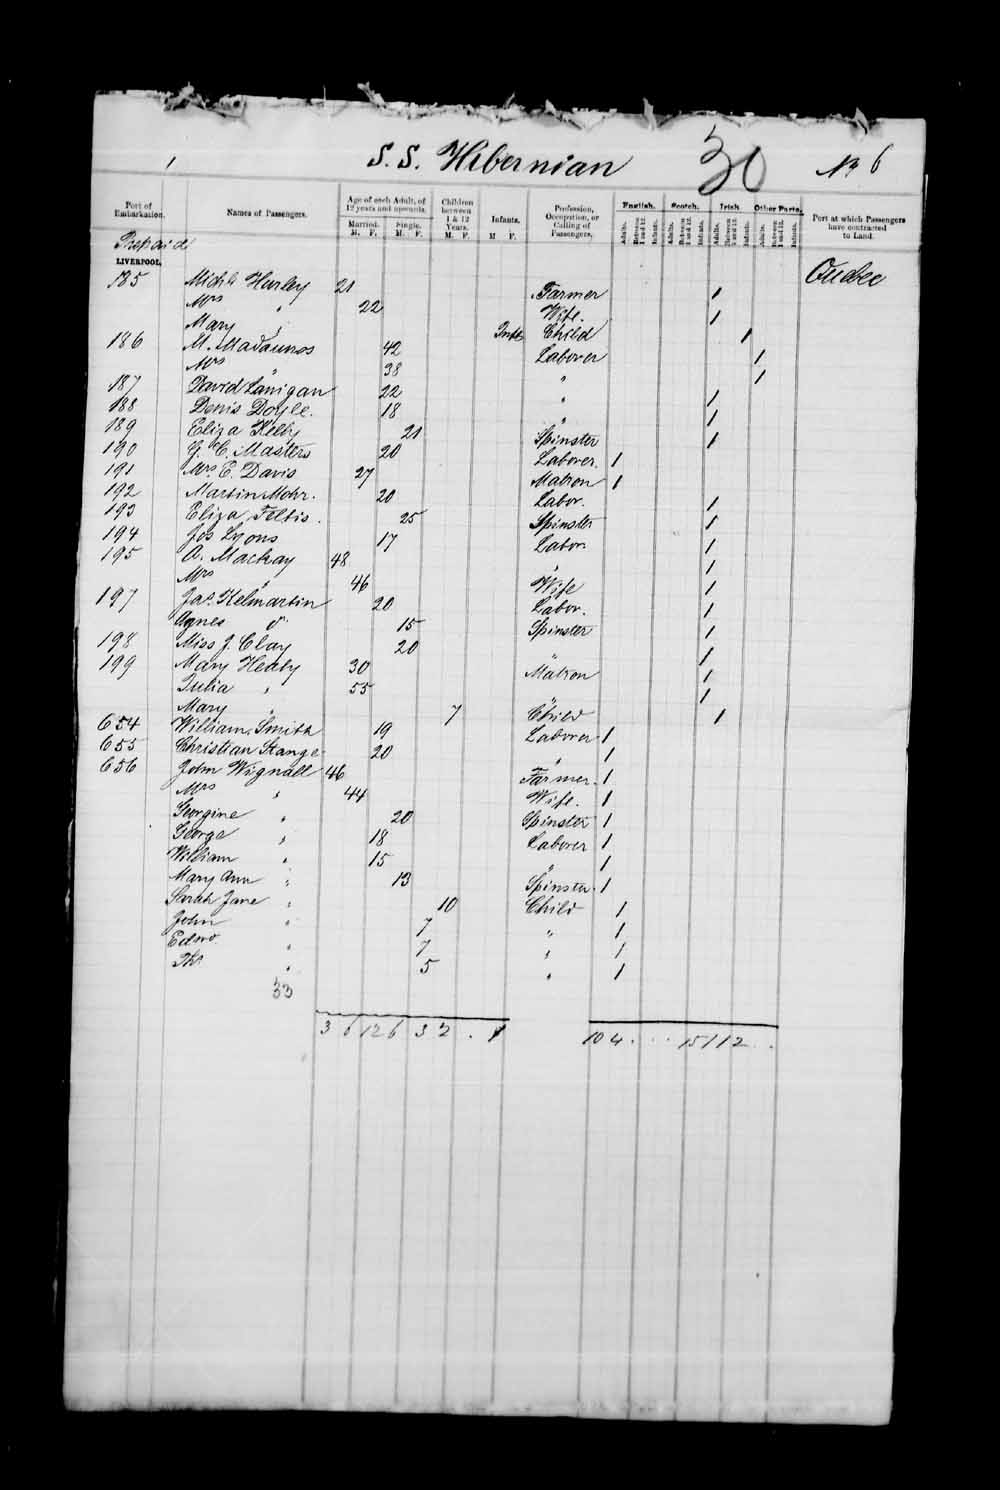 Digitized page of Passenger Lists for Image No.: e003530478